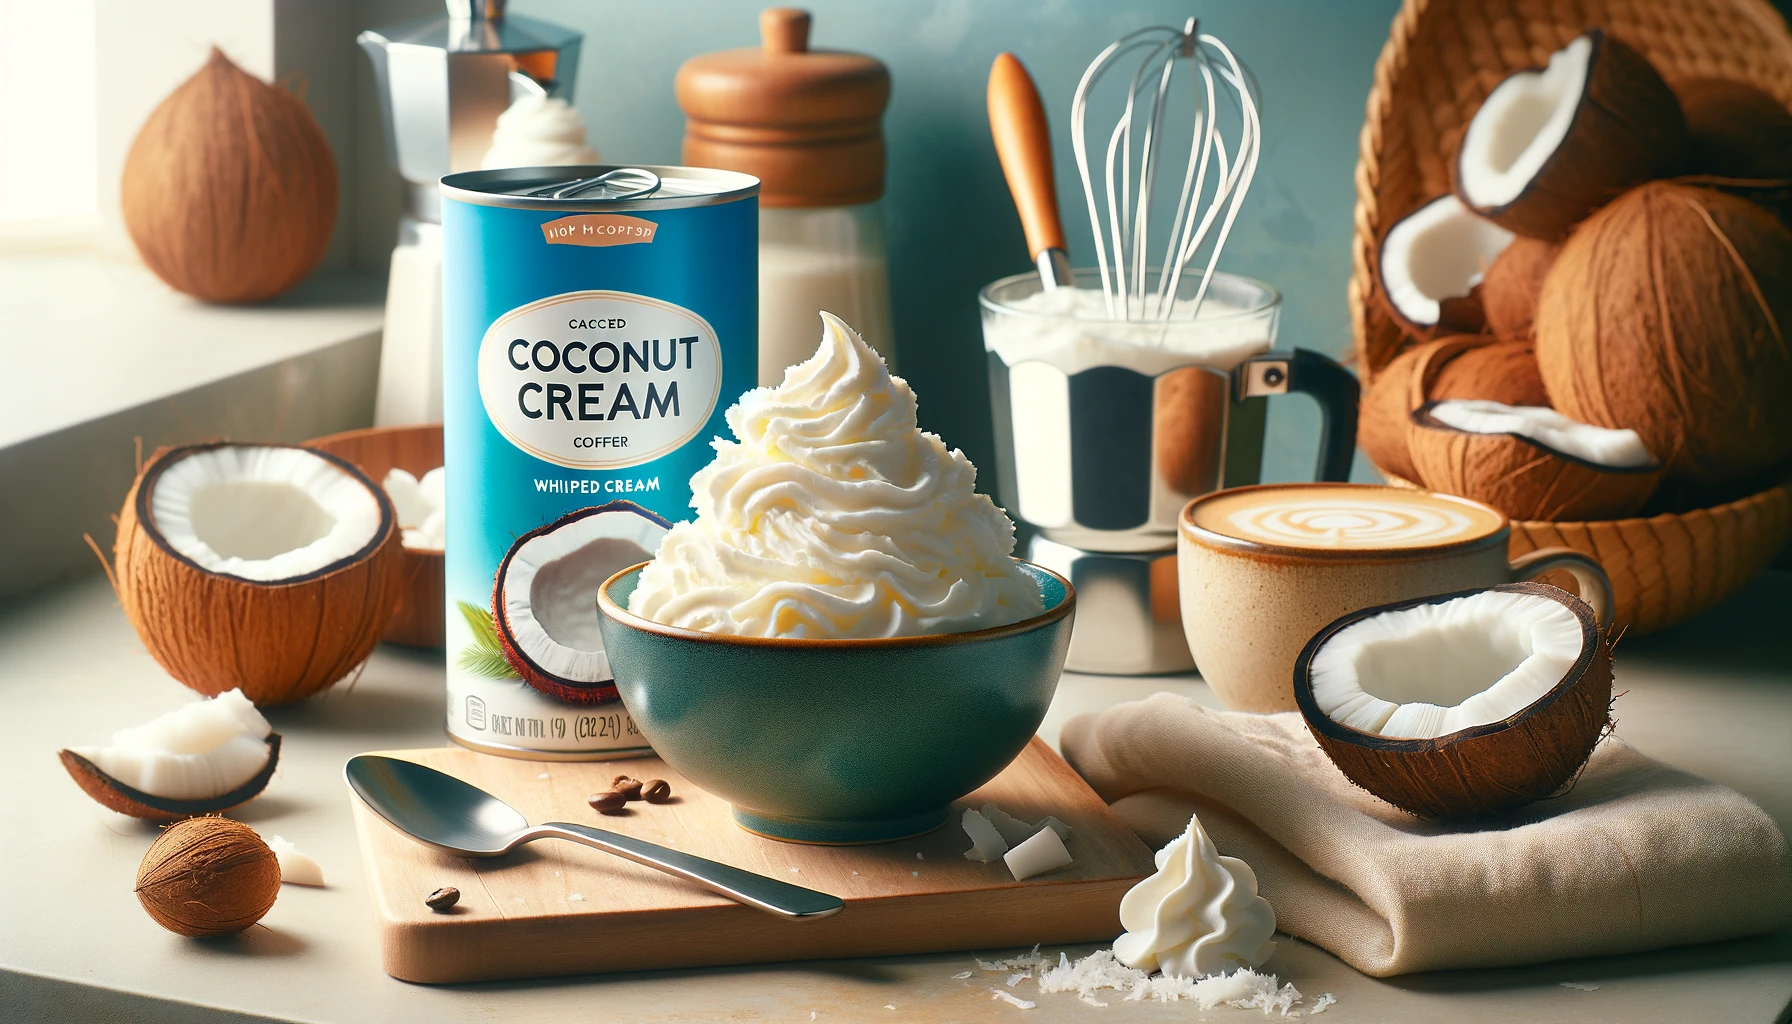 featured image for blog post on making whipped cream from canned coconut cream